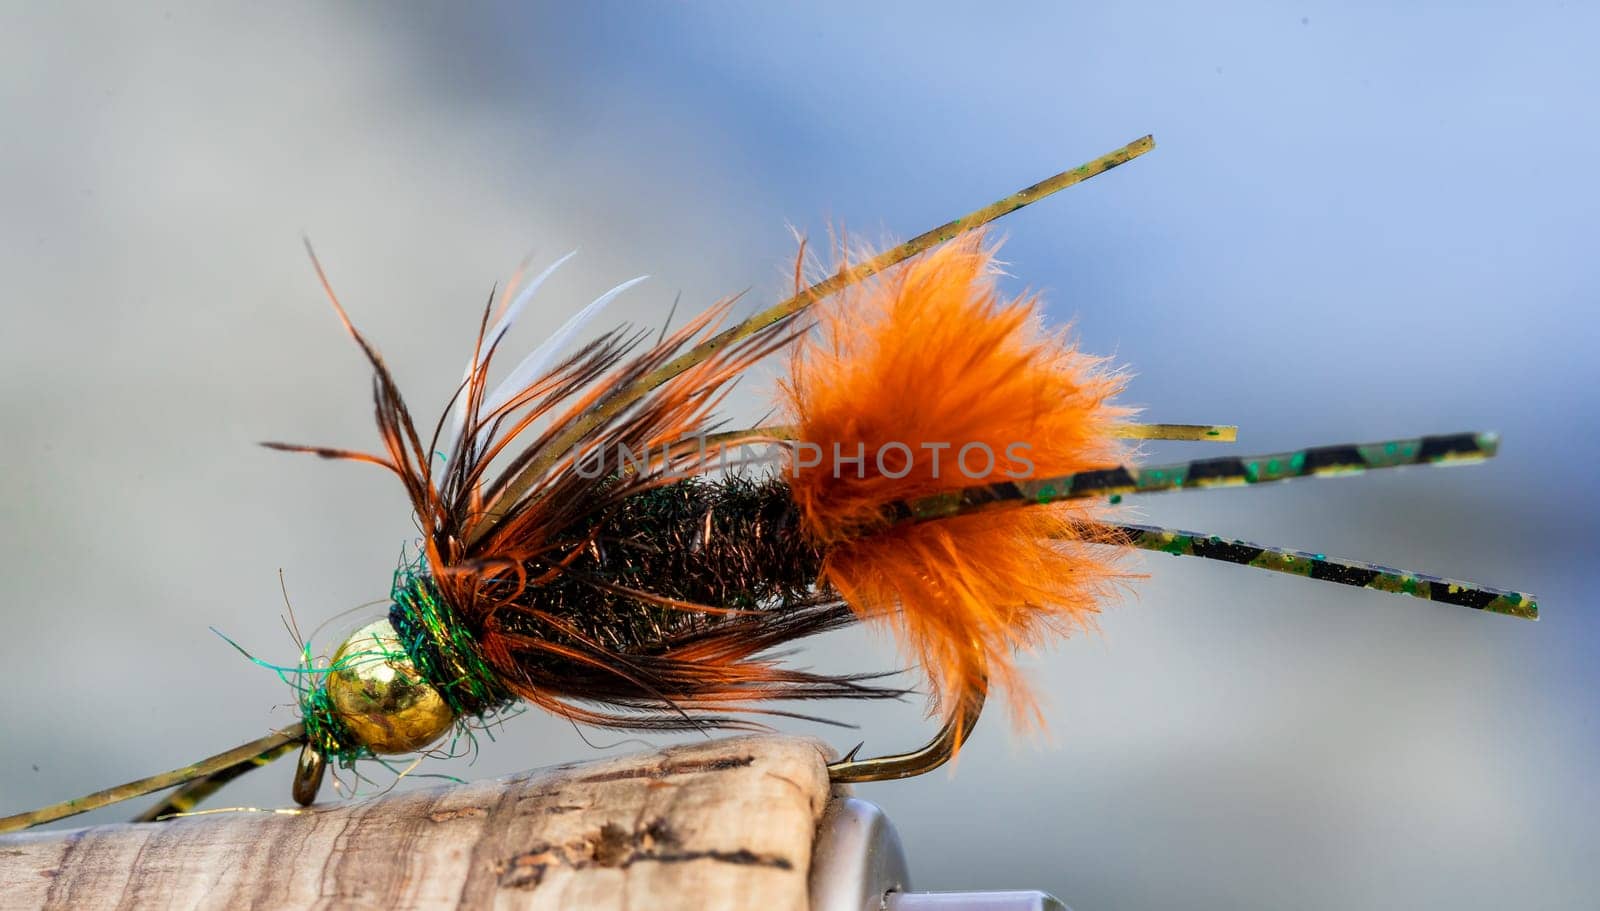 Fly Fishing Detail Closeup at the River by joshuaraineyphotography